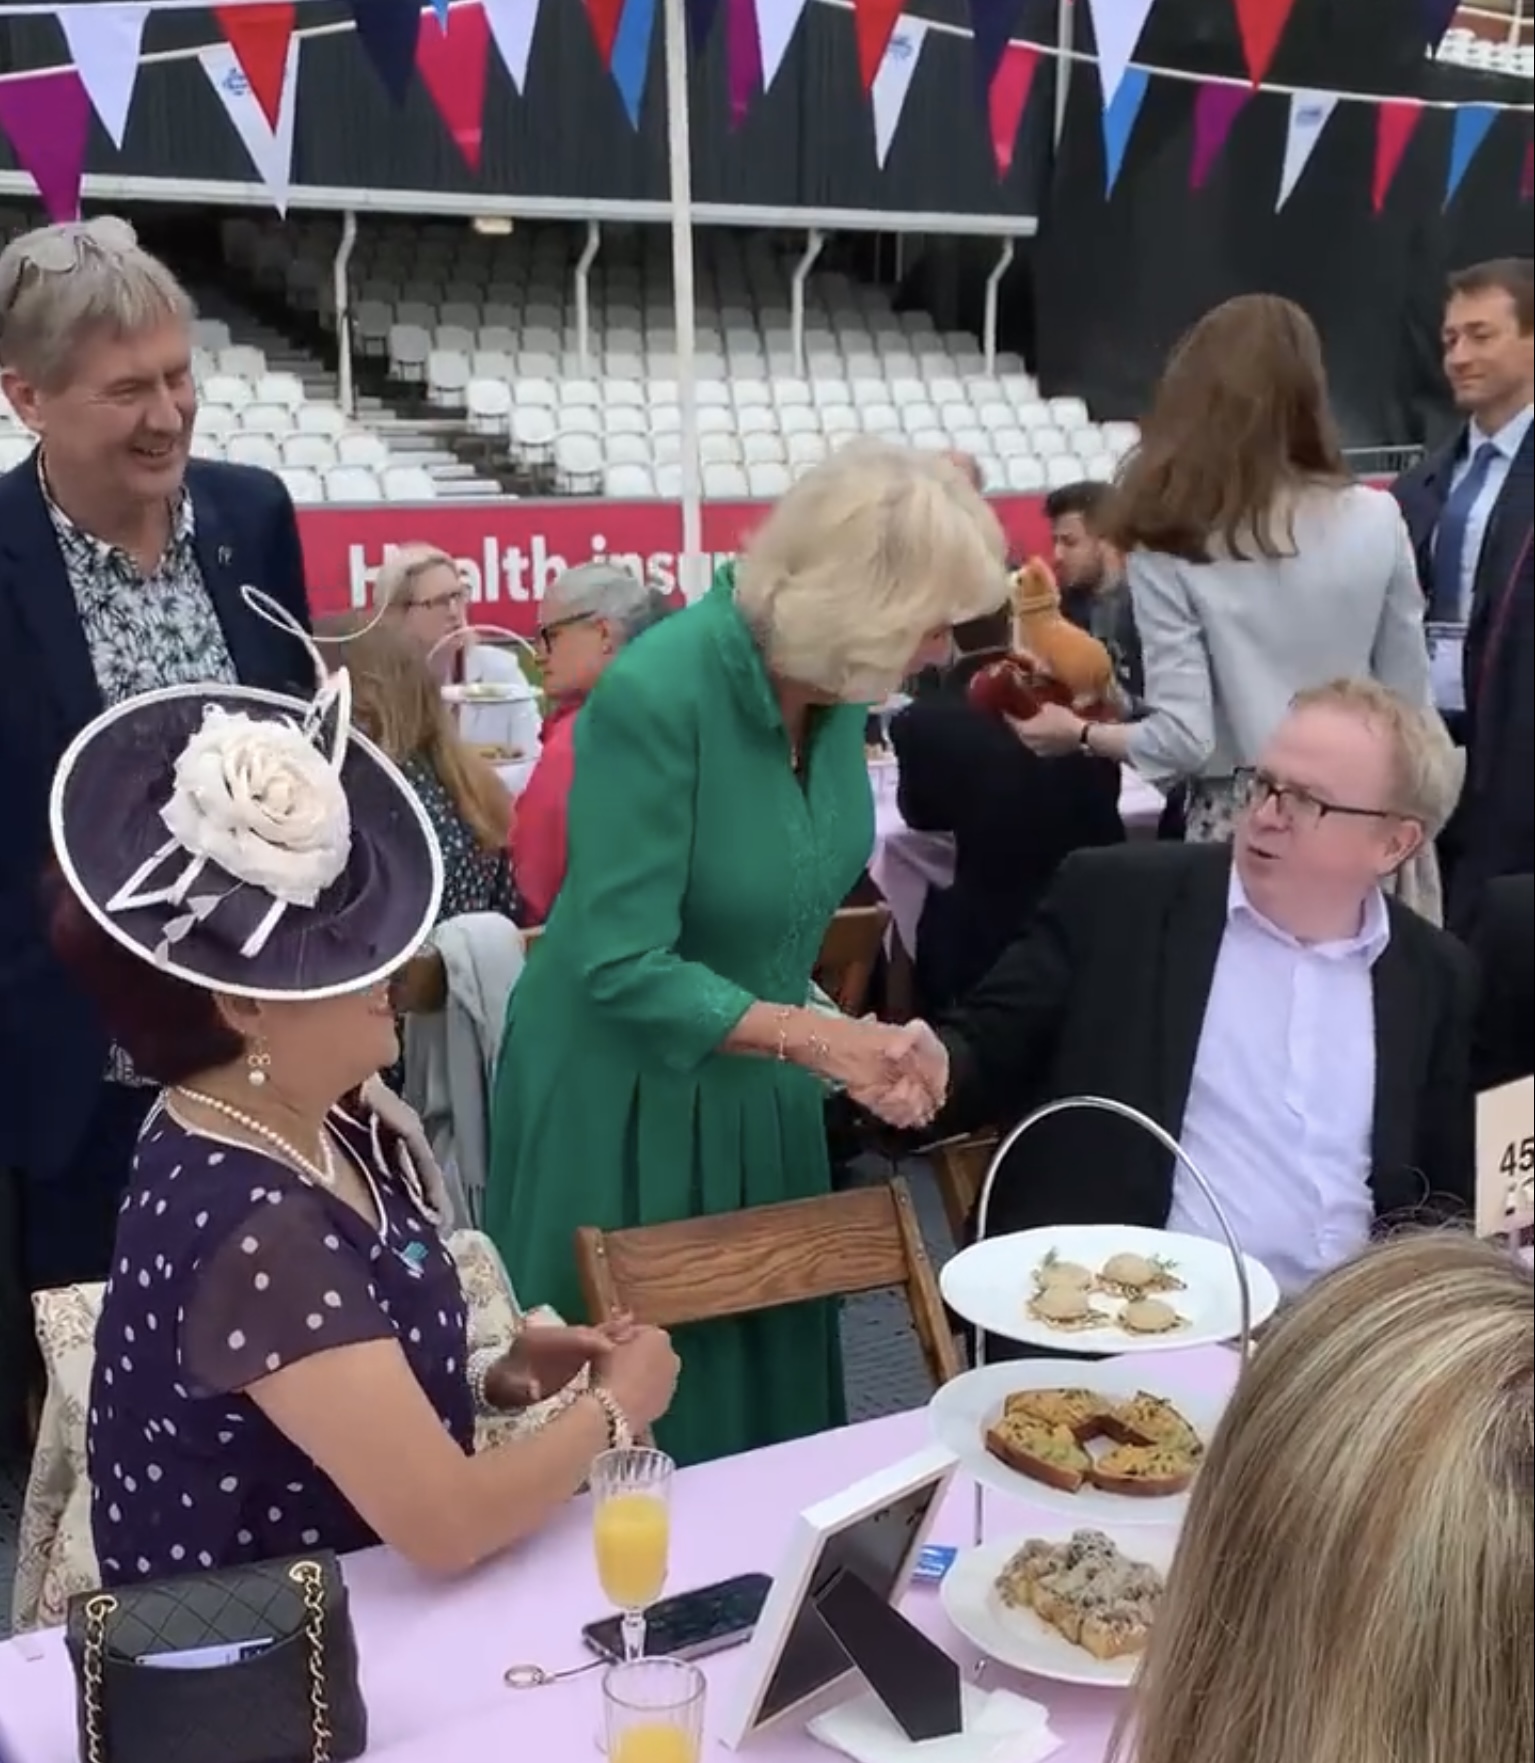 Magician Noel Qualter being thanked by Camilla the Duchess of Cornwall for entertaining at the Queen's Platinum Jubilee at the Oval Cricket Ground